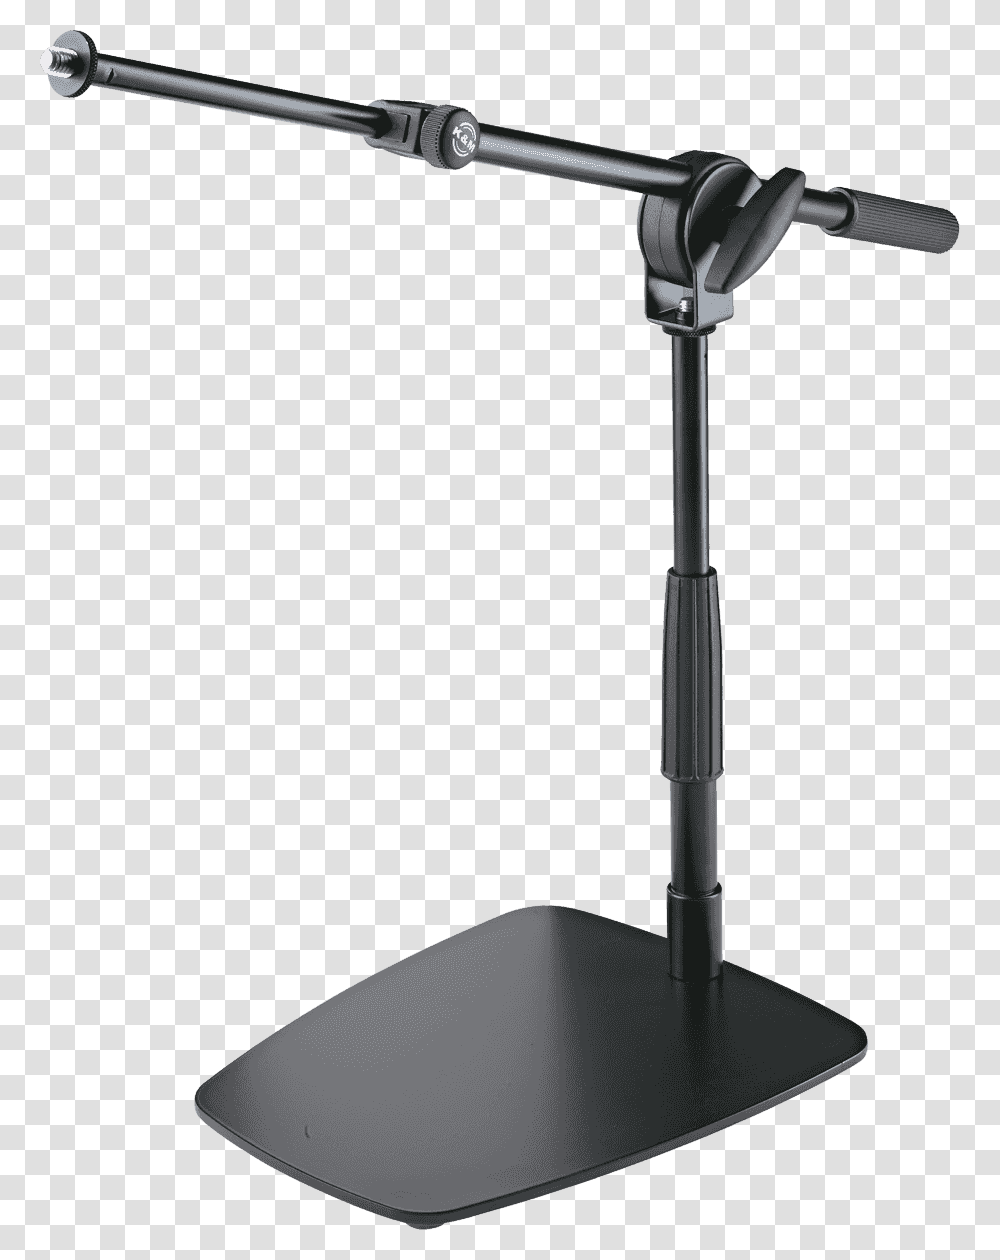 25993 Microphone Stand Musicgooddeal 25993 Microphone Stand, Lamp, Tool, Shop, Magnifying Transparent Png